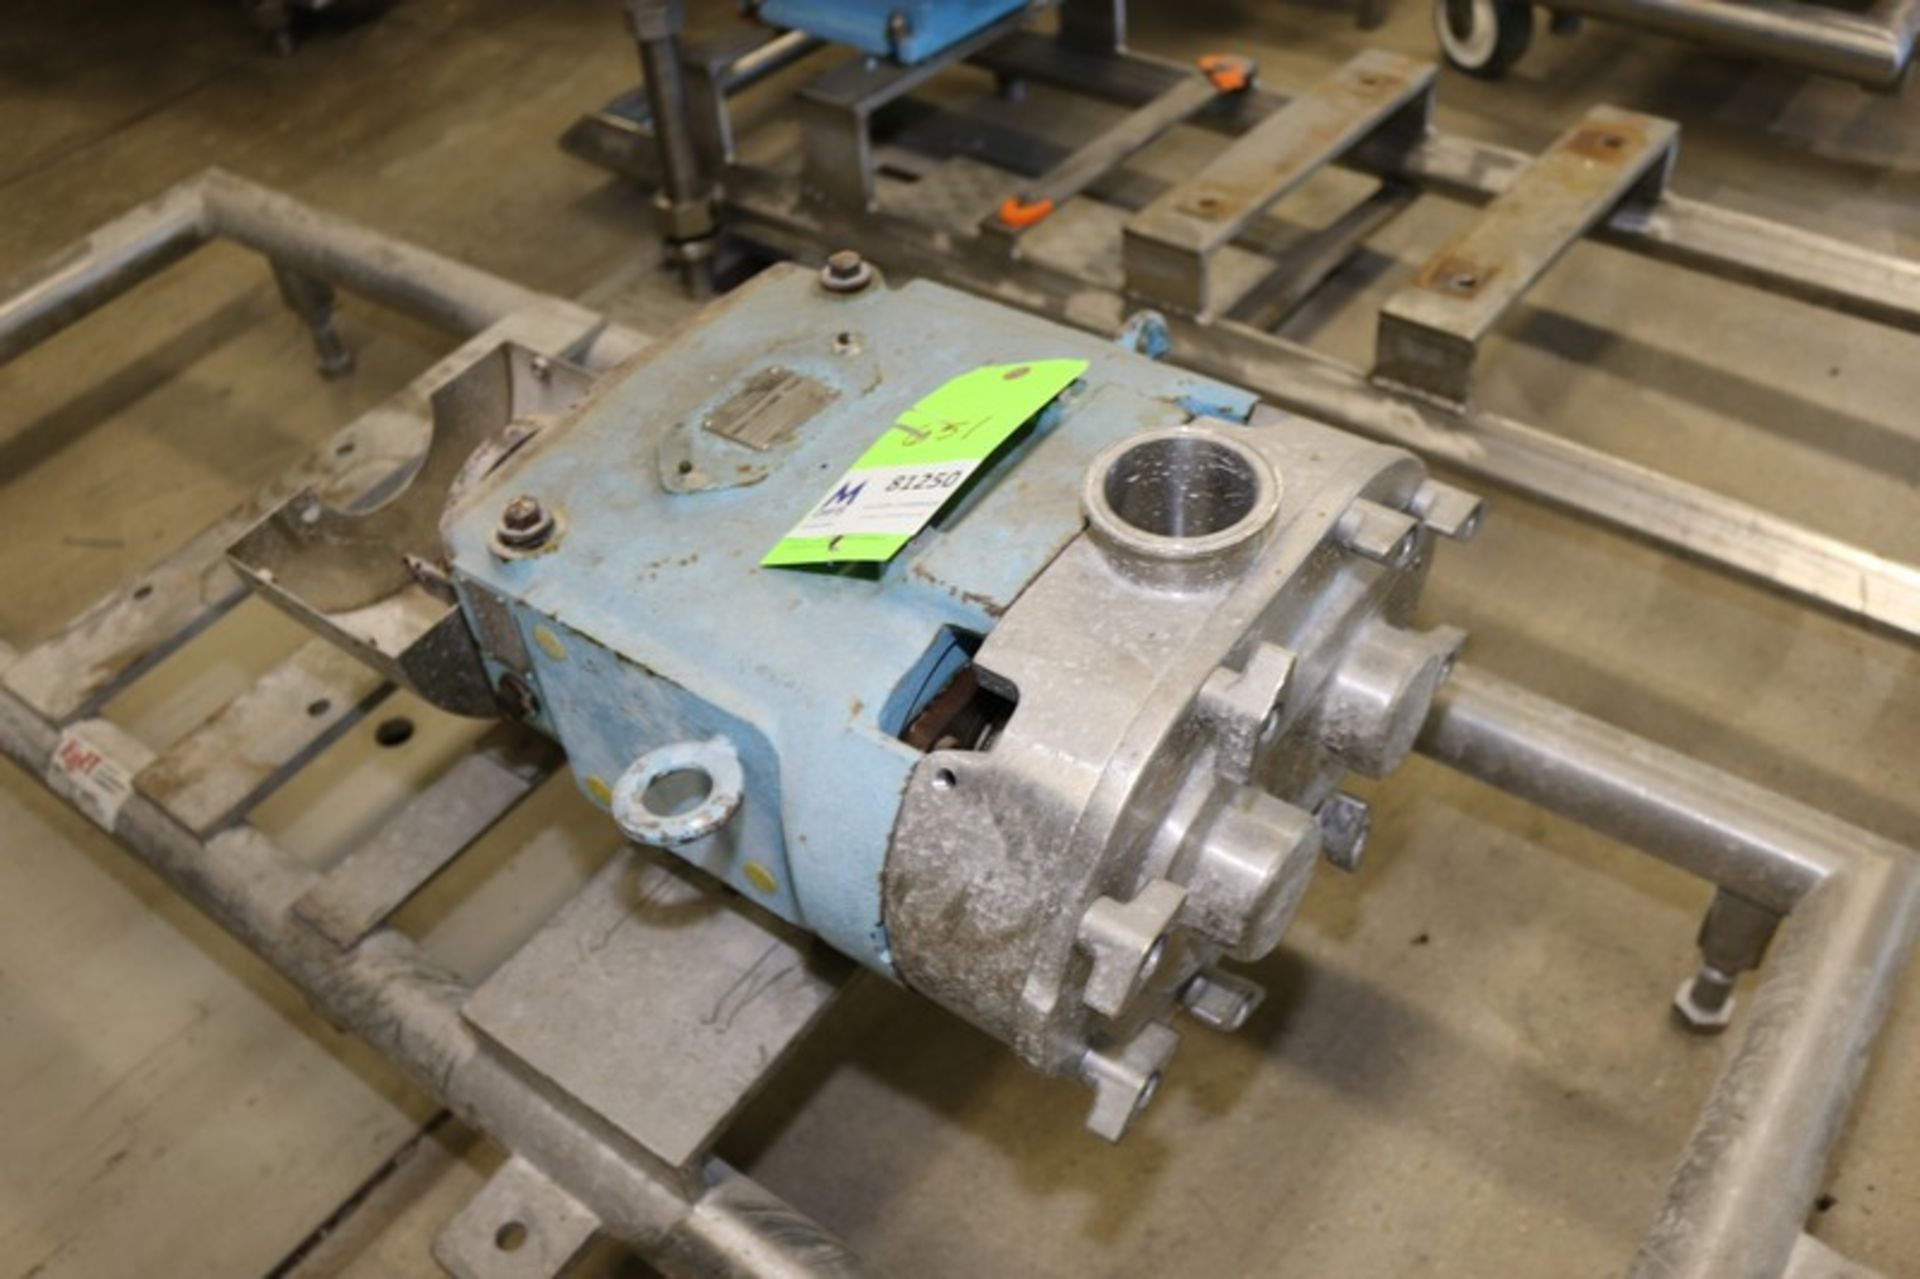 Waukesha Positive Displacement Pump Head, M/N 60, S/N 135108, with Aprox. 2" Inlet/Outlet, Mounted - Image 4 of 5